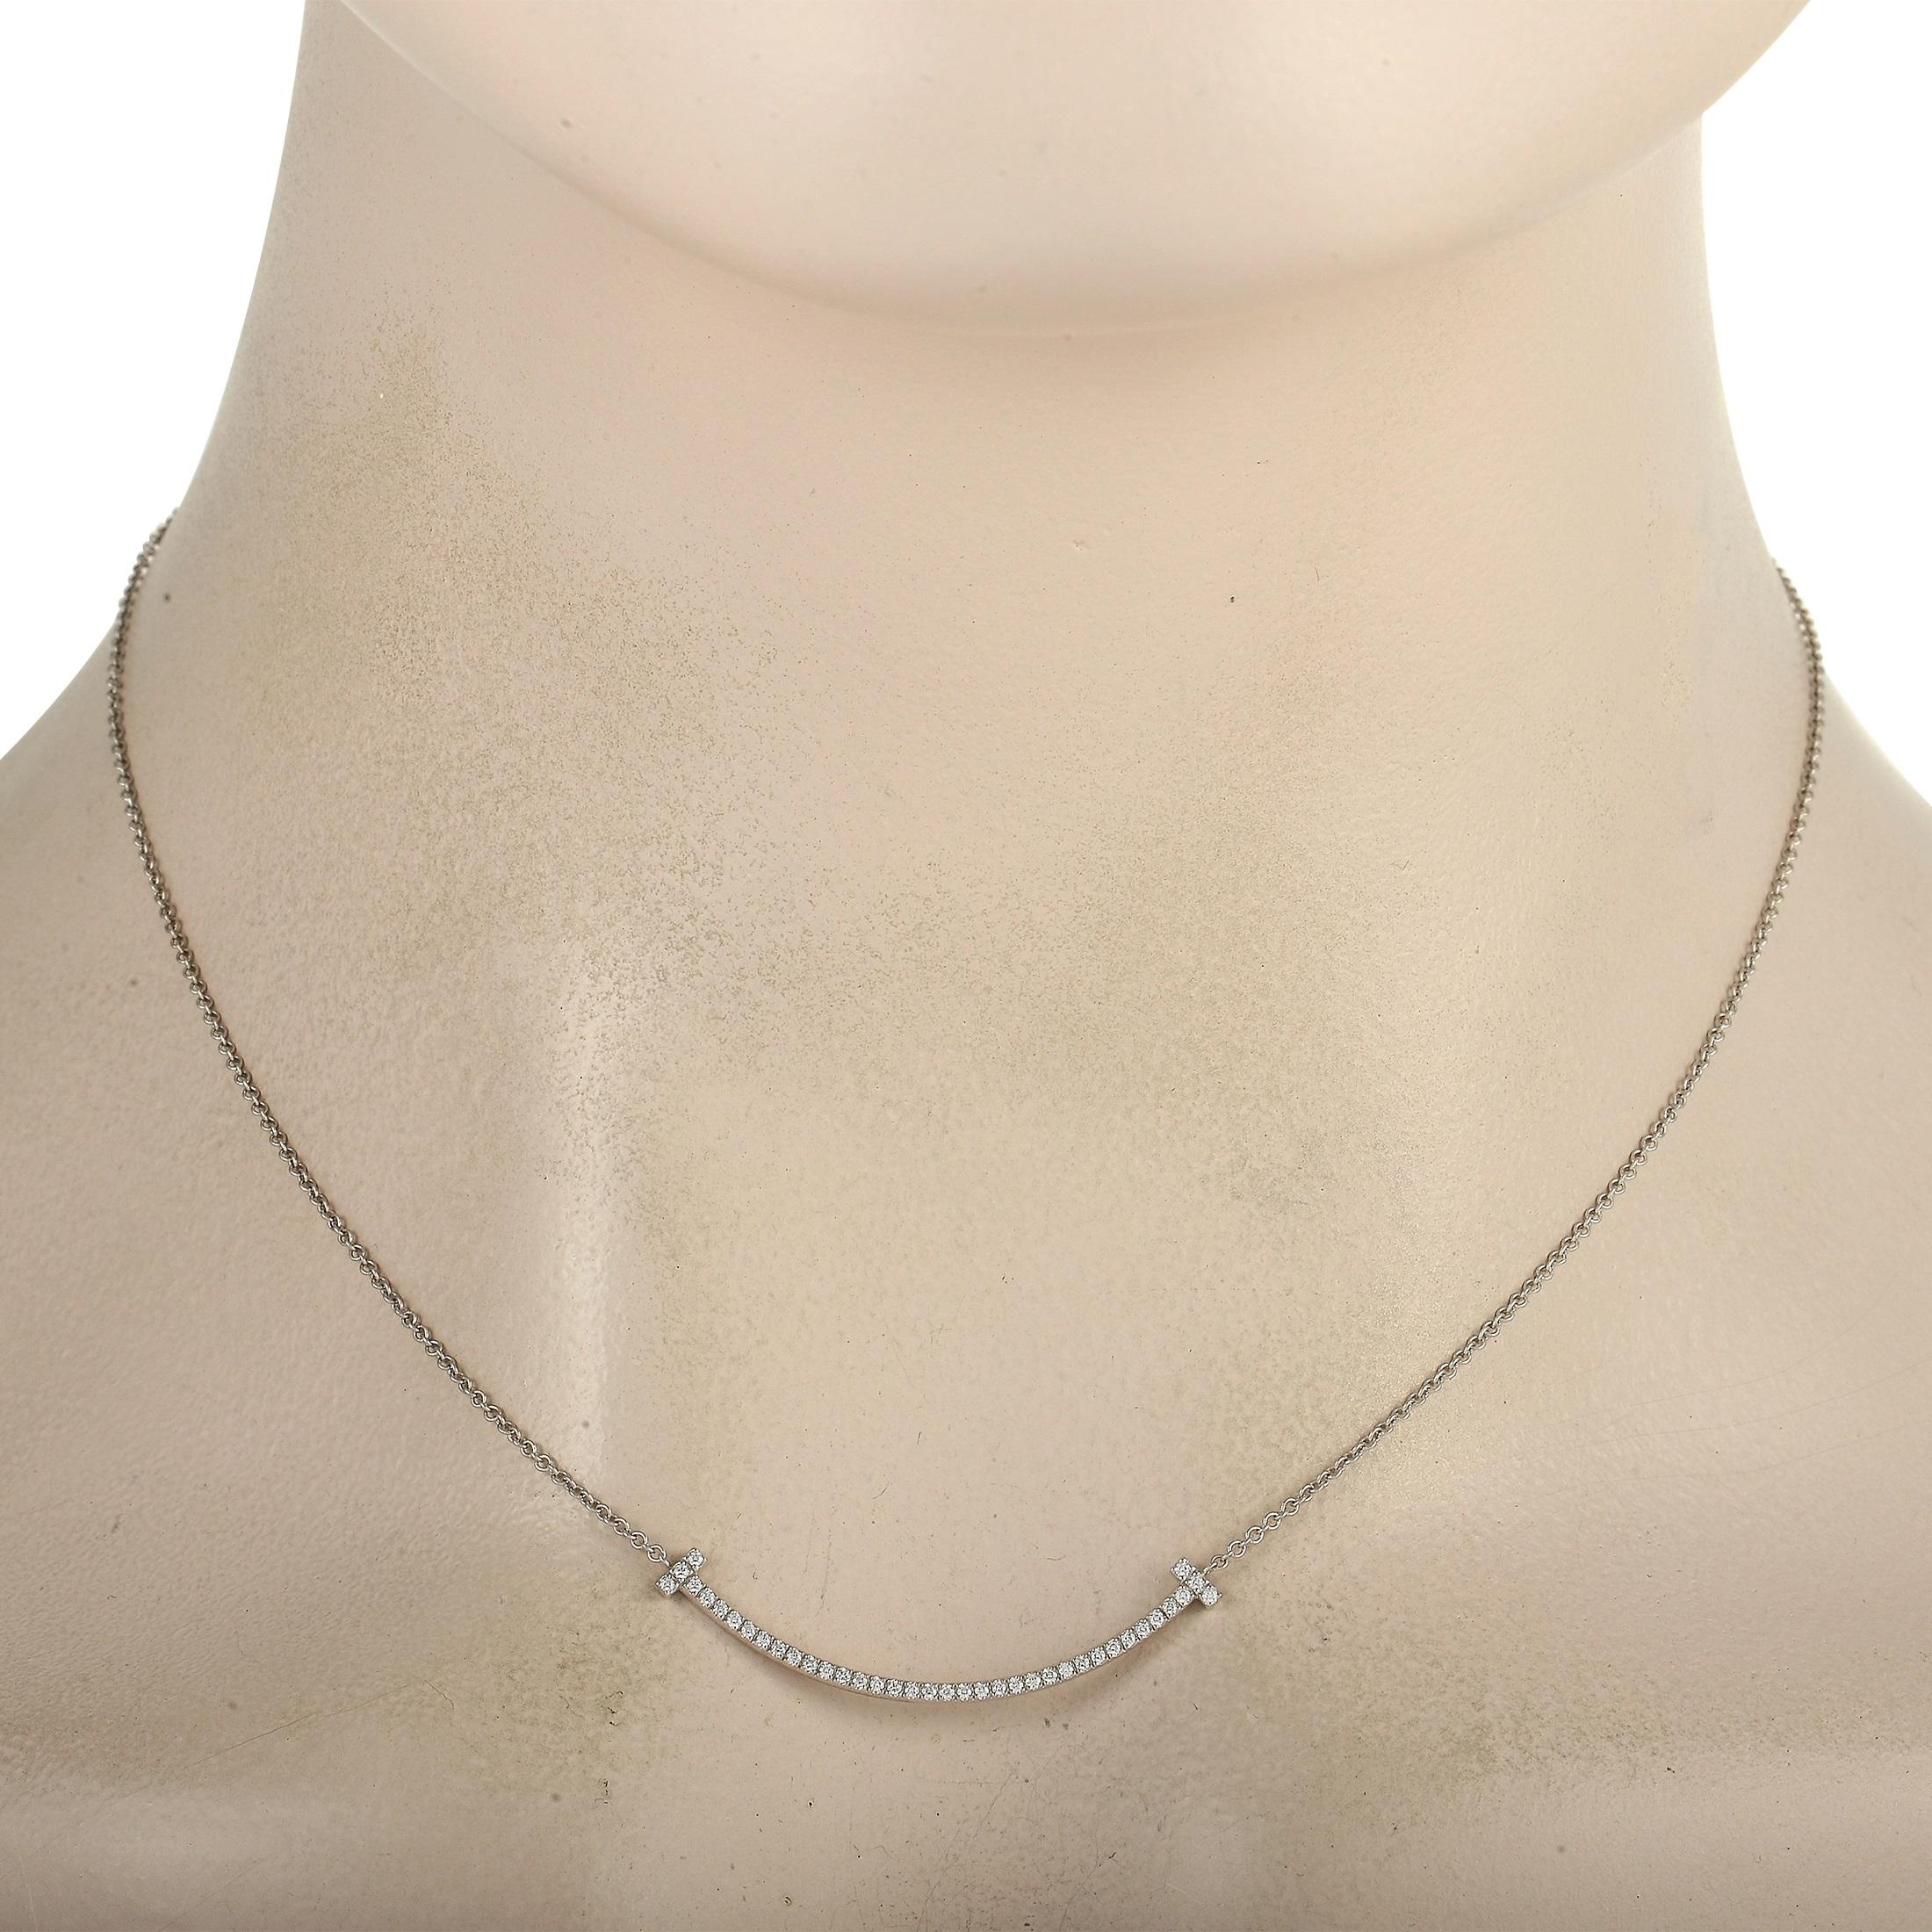 This pretty Tiffany & Co T Smile 18K White Gold Diamond Necklace is sure to brighten your day! The necklace features a fine 18K white gold chain, highlighting the beautiful 18k White Gold diamond T Smile pendant which measures 1.50 inches in length